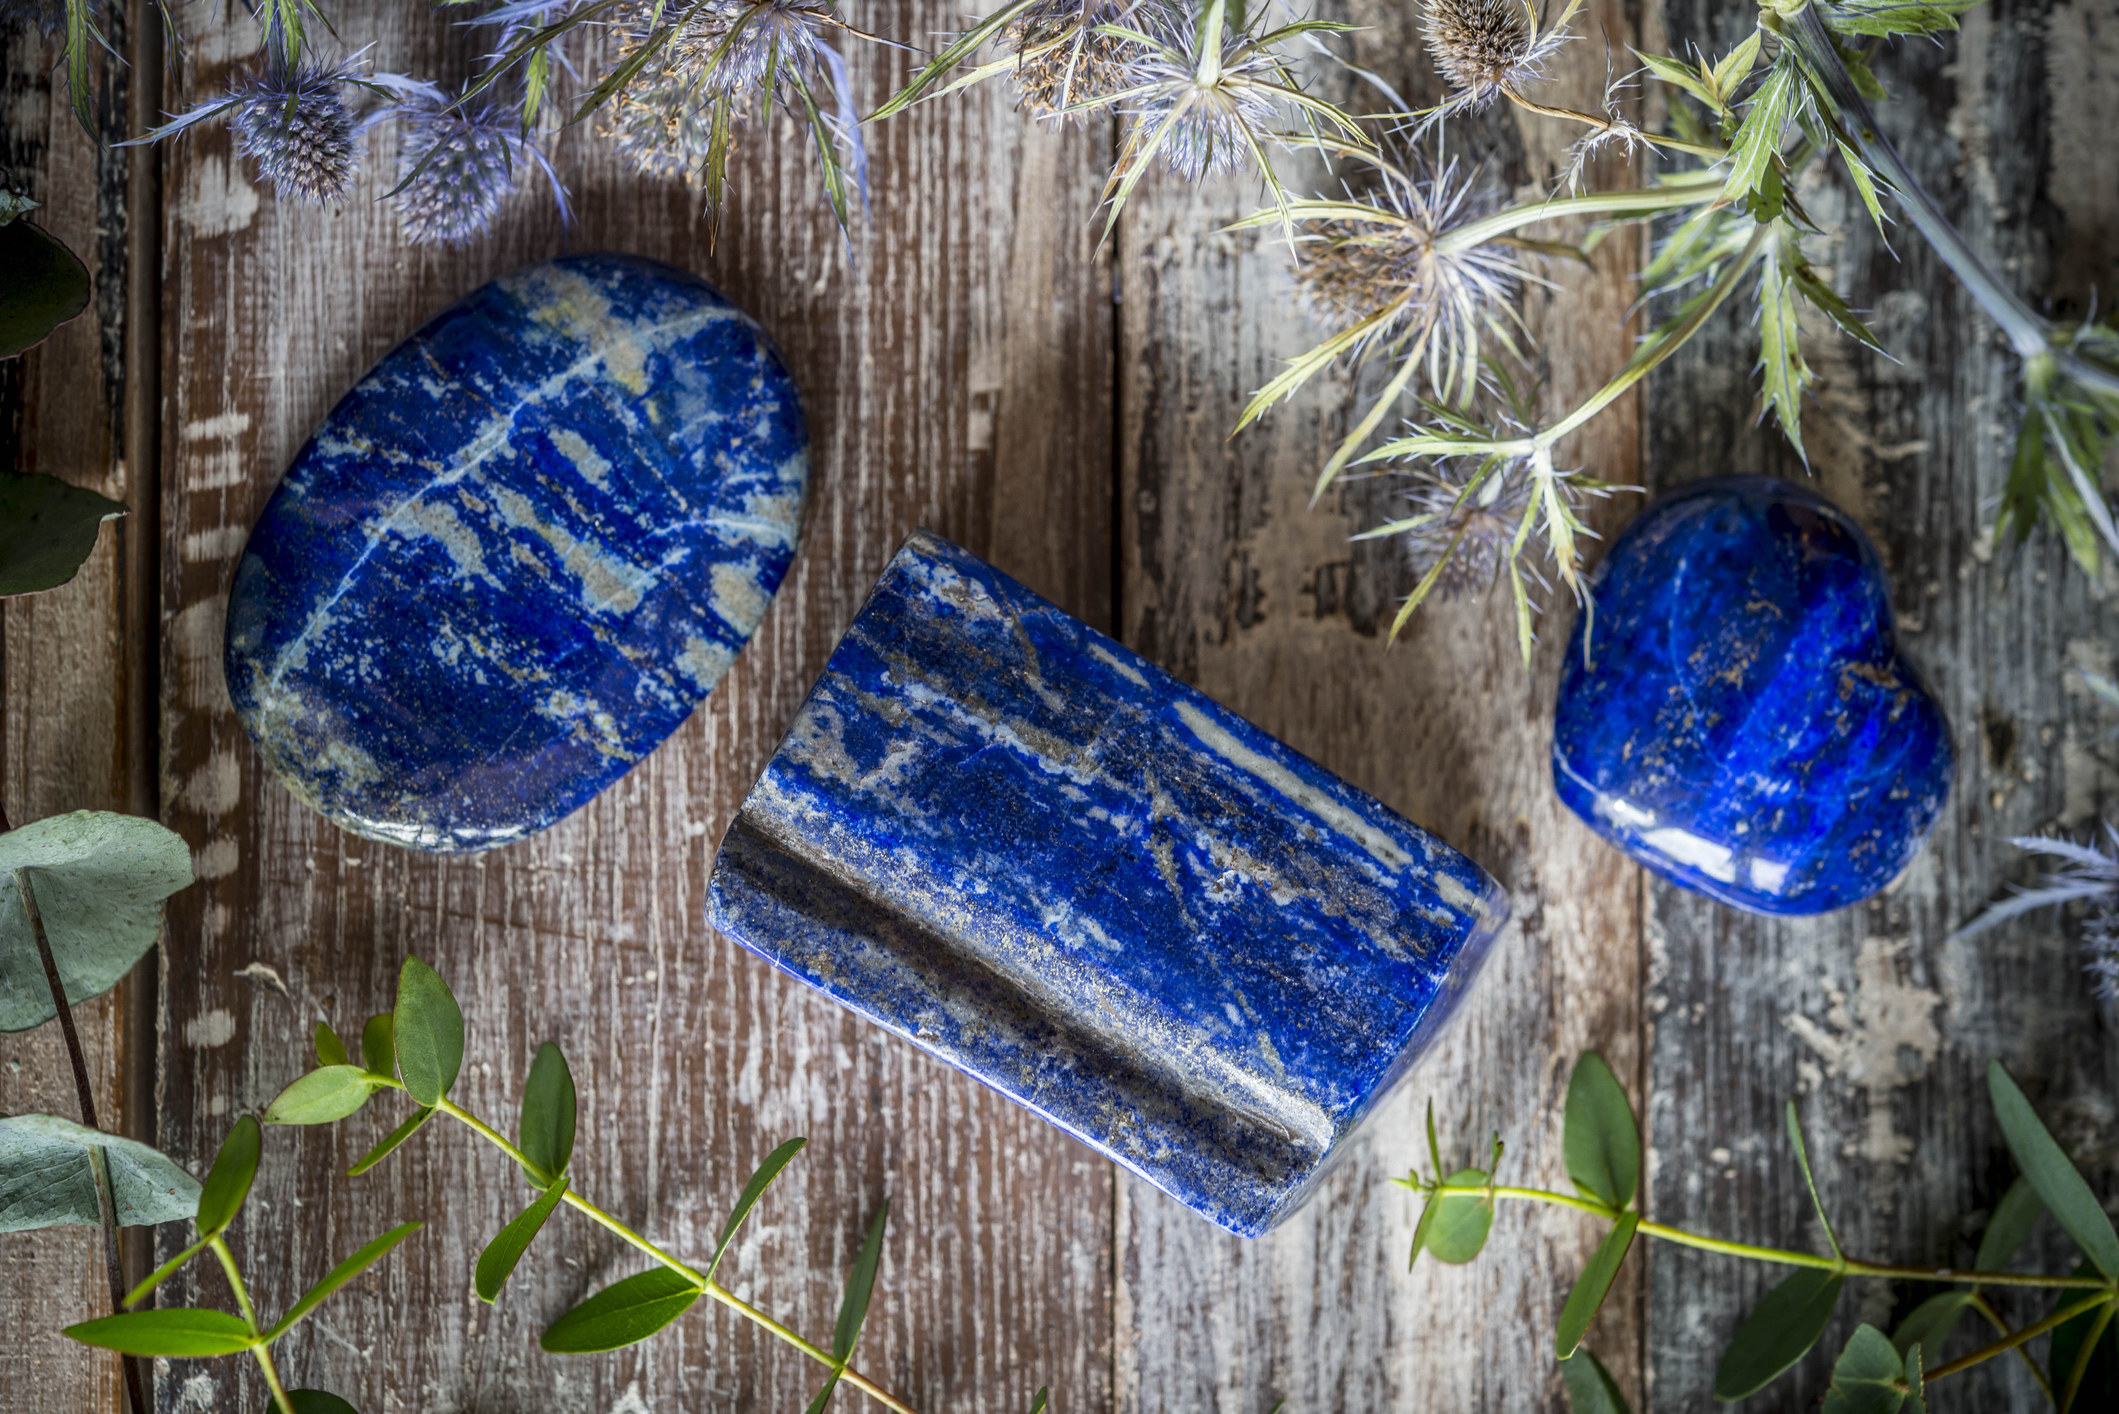 Lapis lazuli surrounded by thistles, Eucalyptus on a rustic wooden background